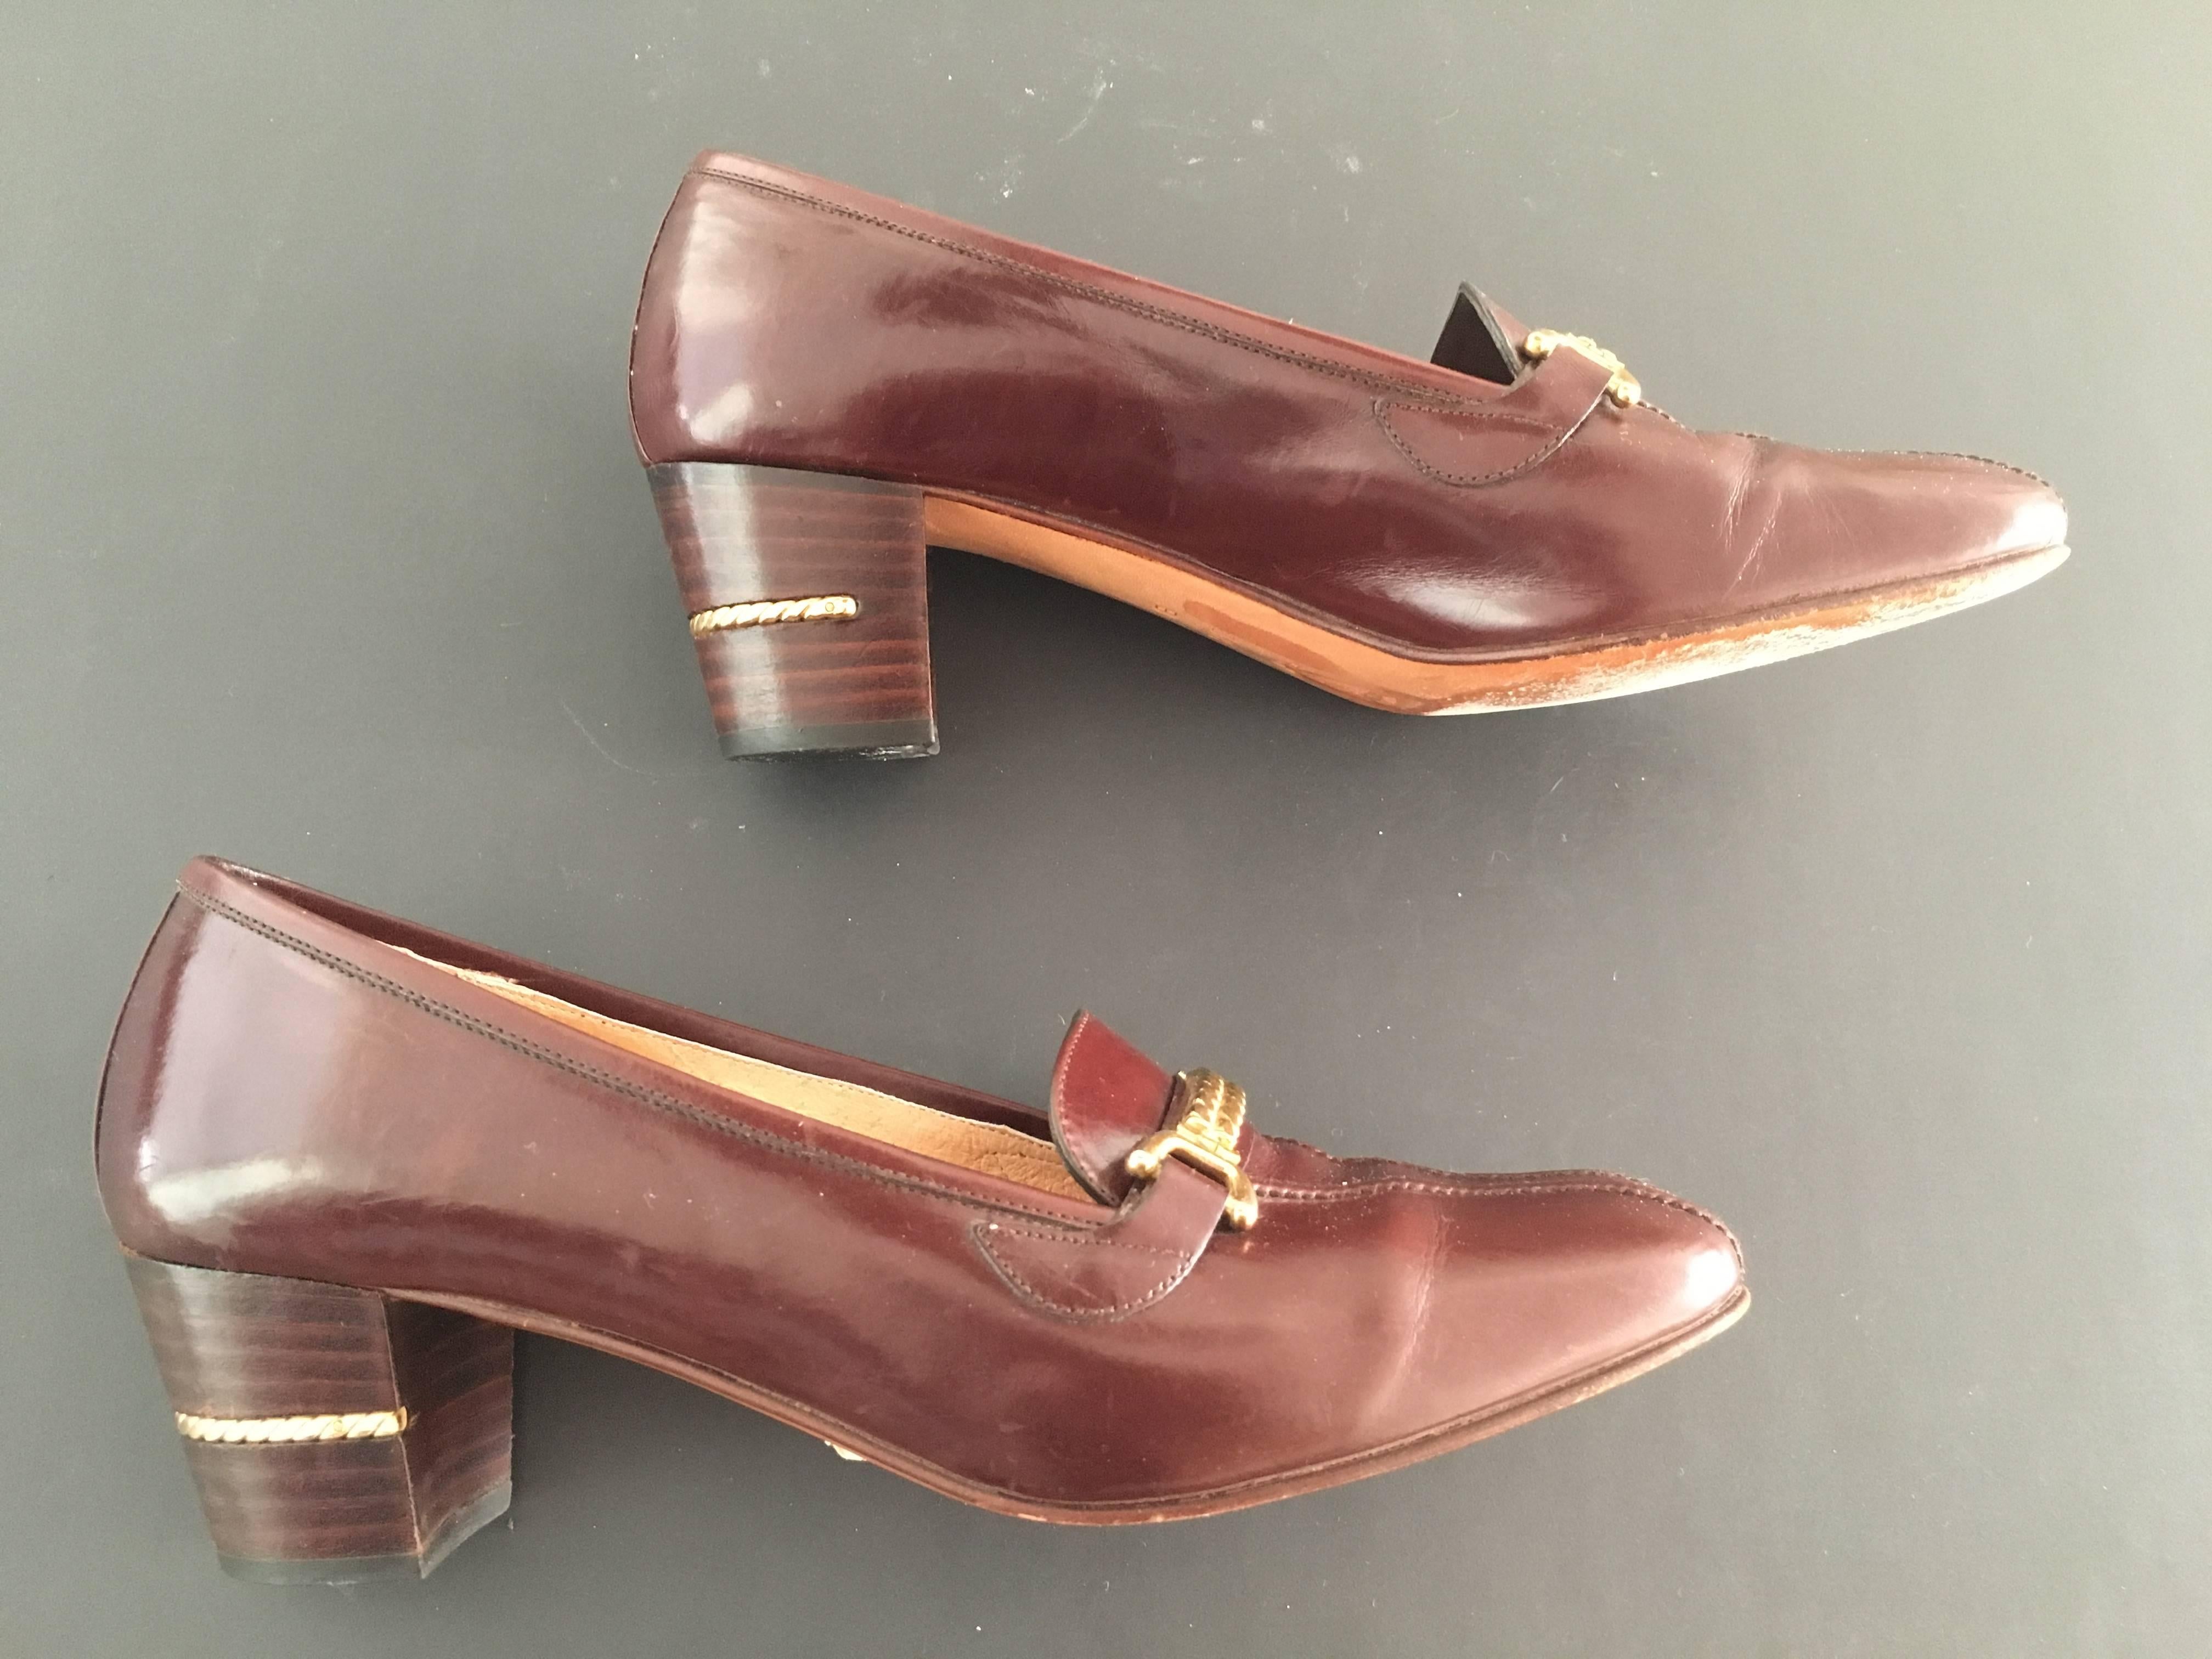 Gucci Brown Leather Heeled Loafer with Gold Braid Buckle Size 37.1/2 B. 2